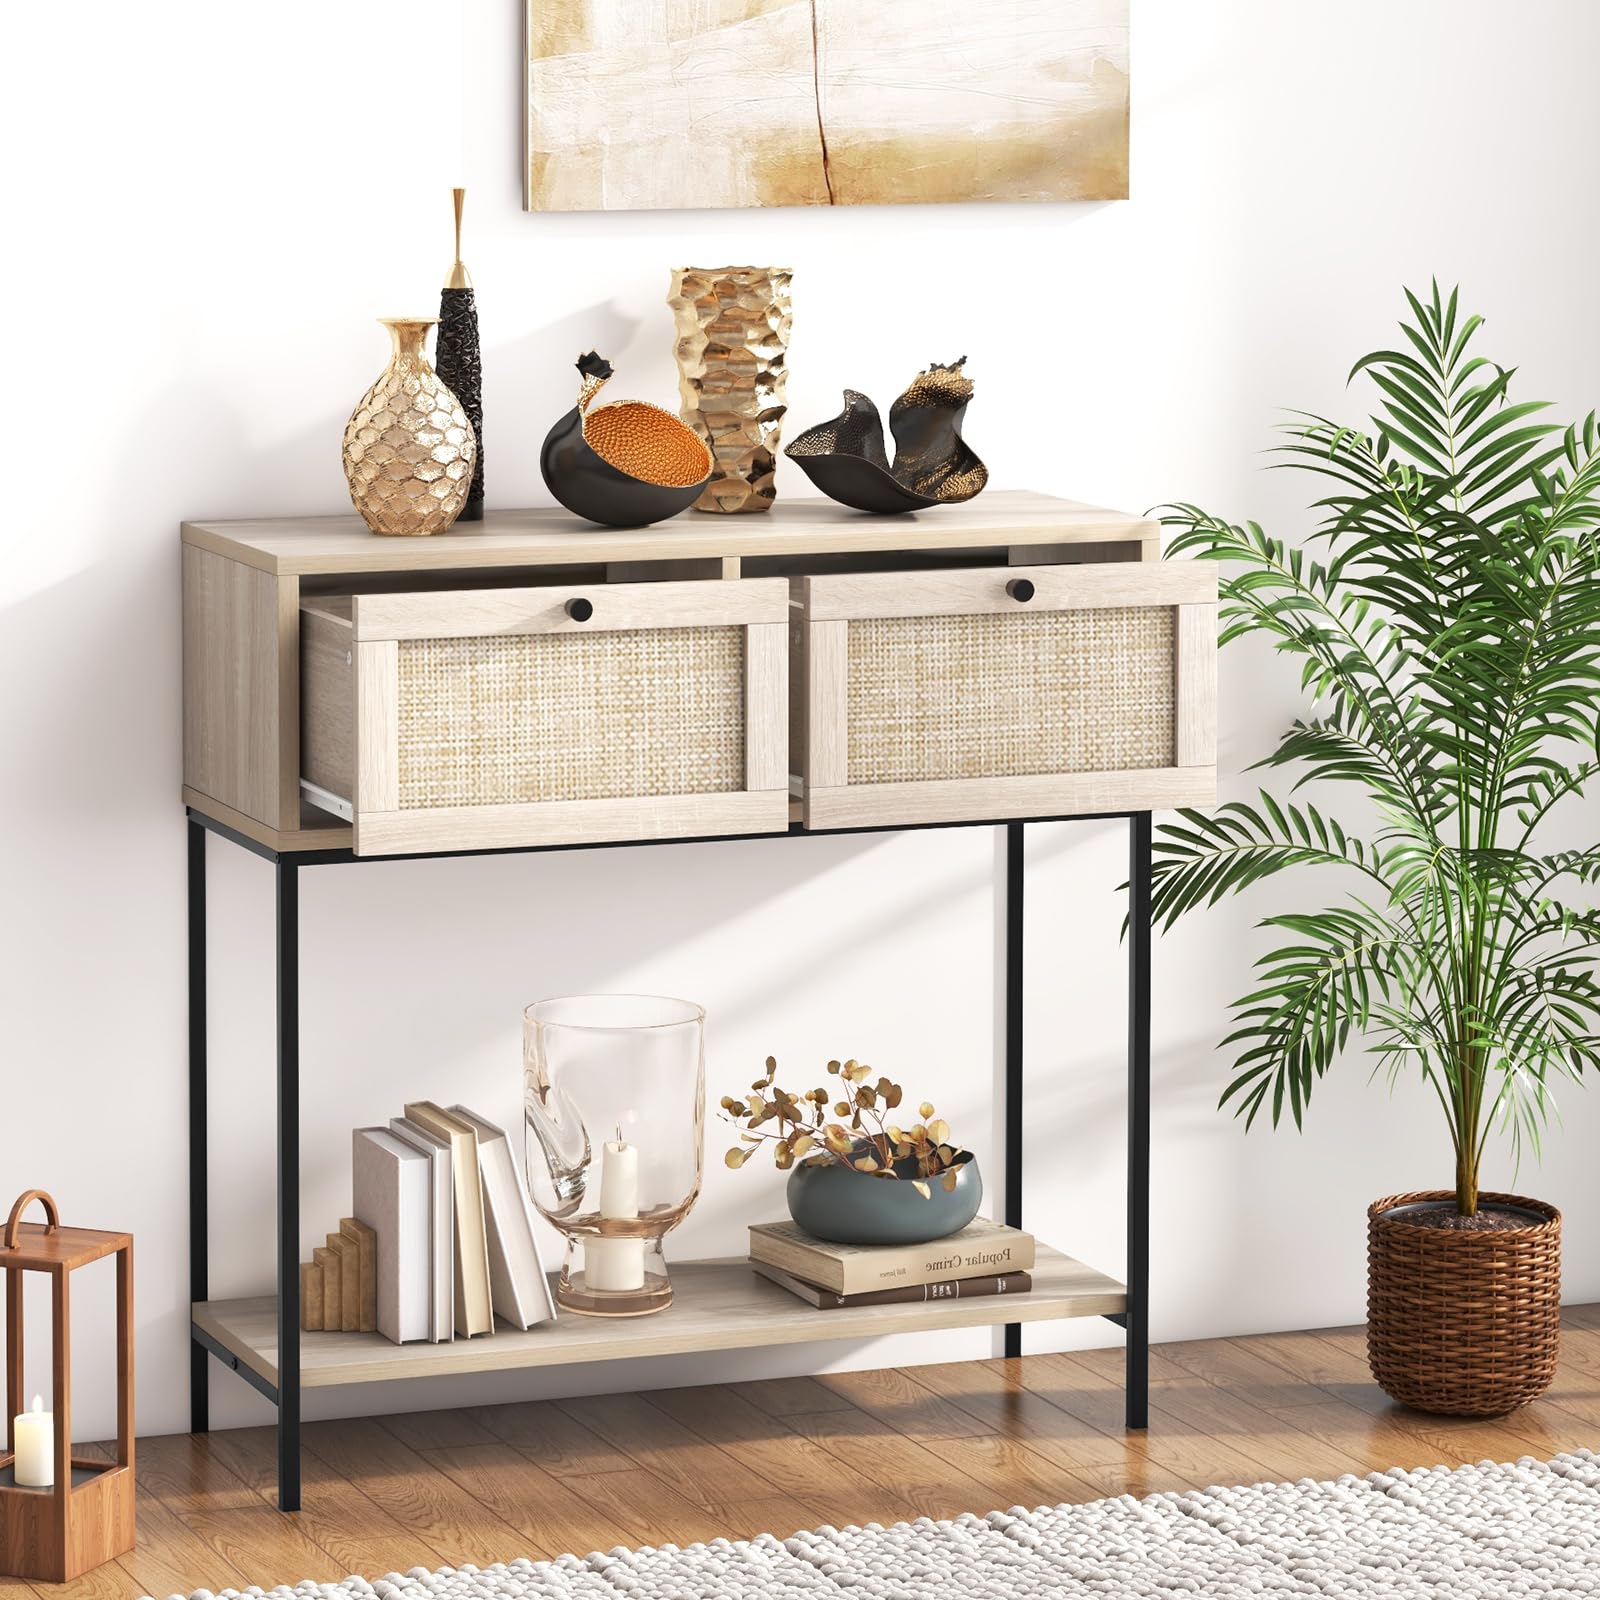 Giantex Console Table with Rattan Drawers - 31.5" Entryway Table w/ 2 Drawers & Open Storage Shelf